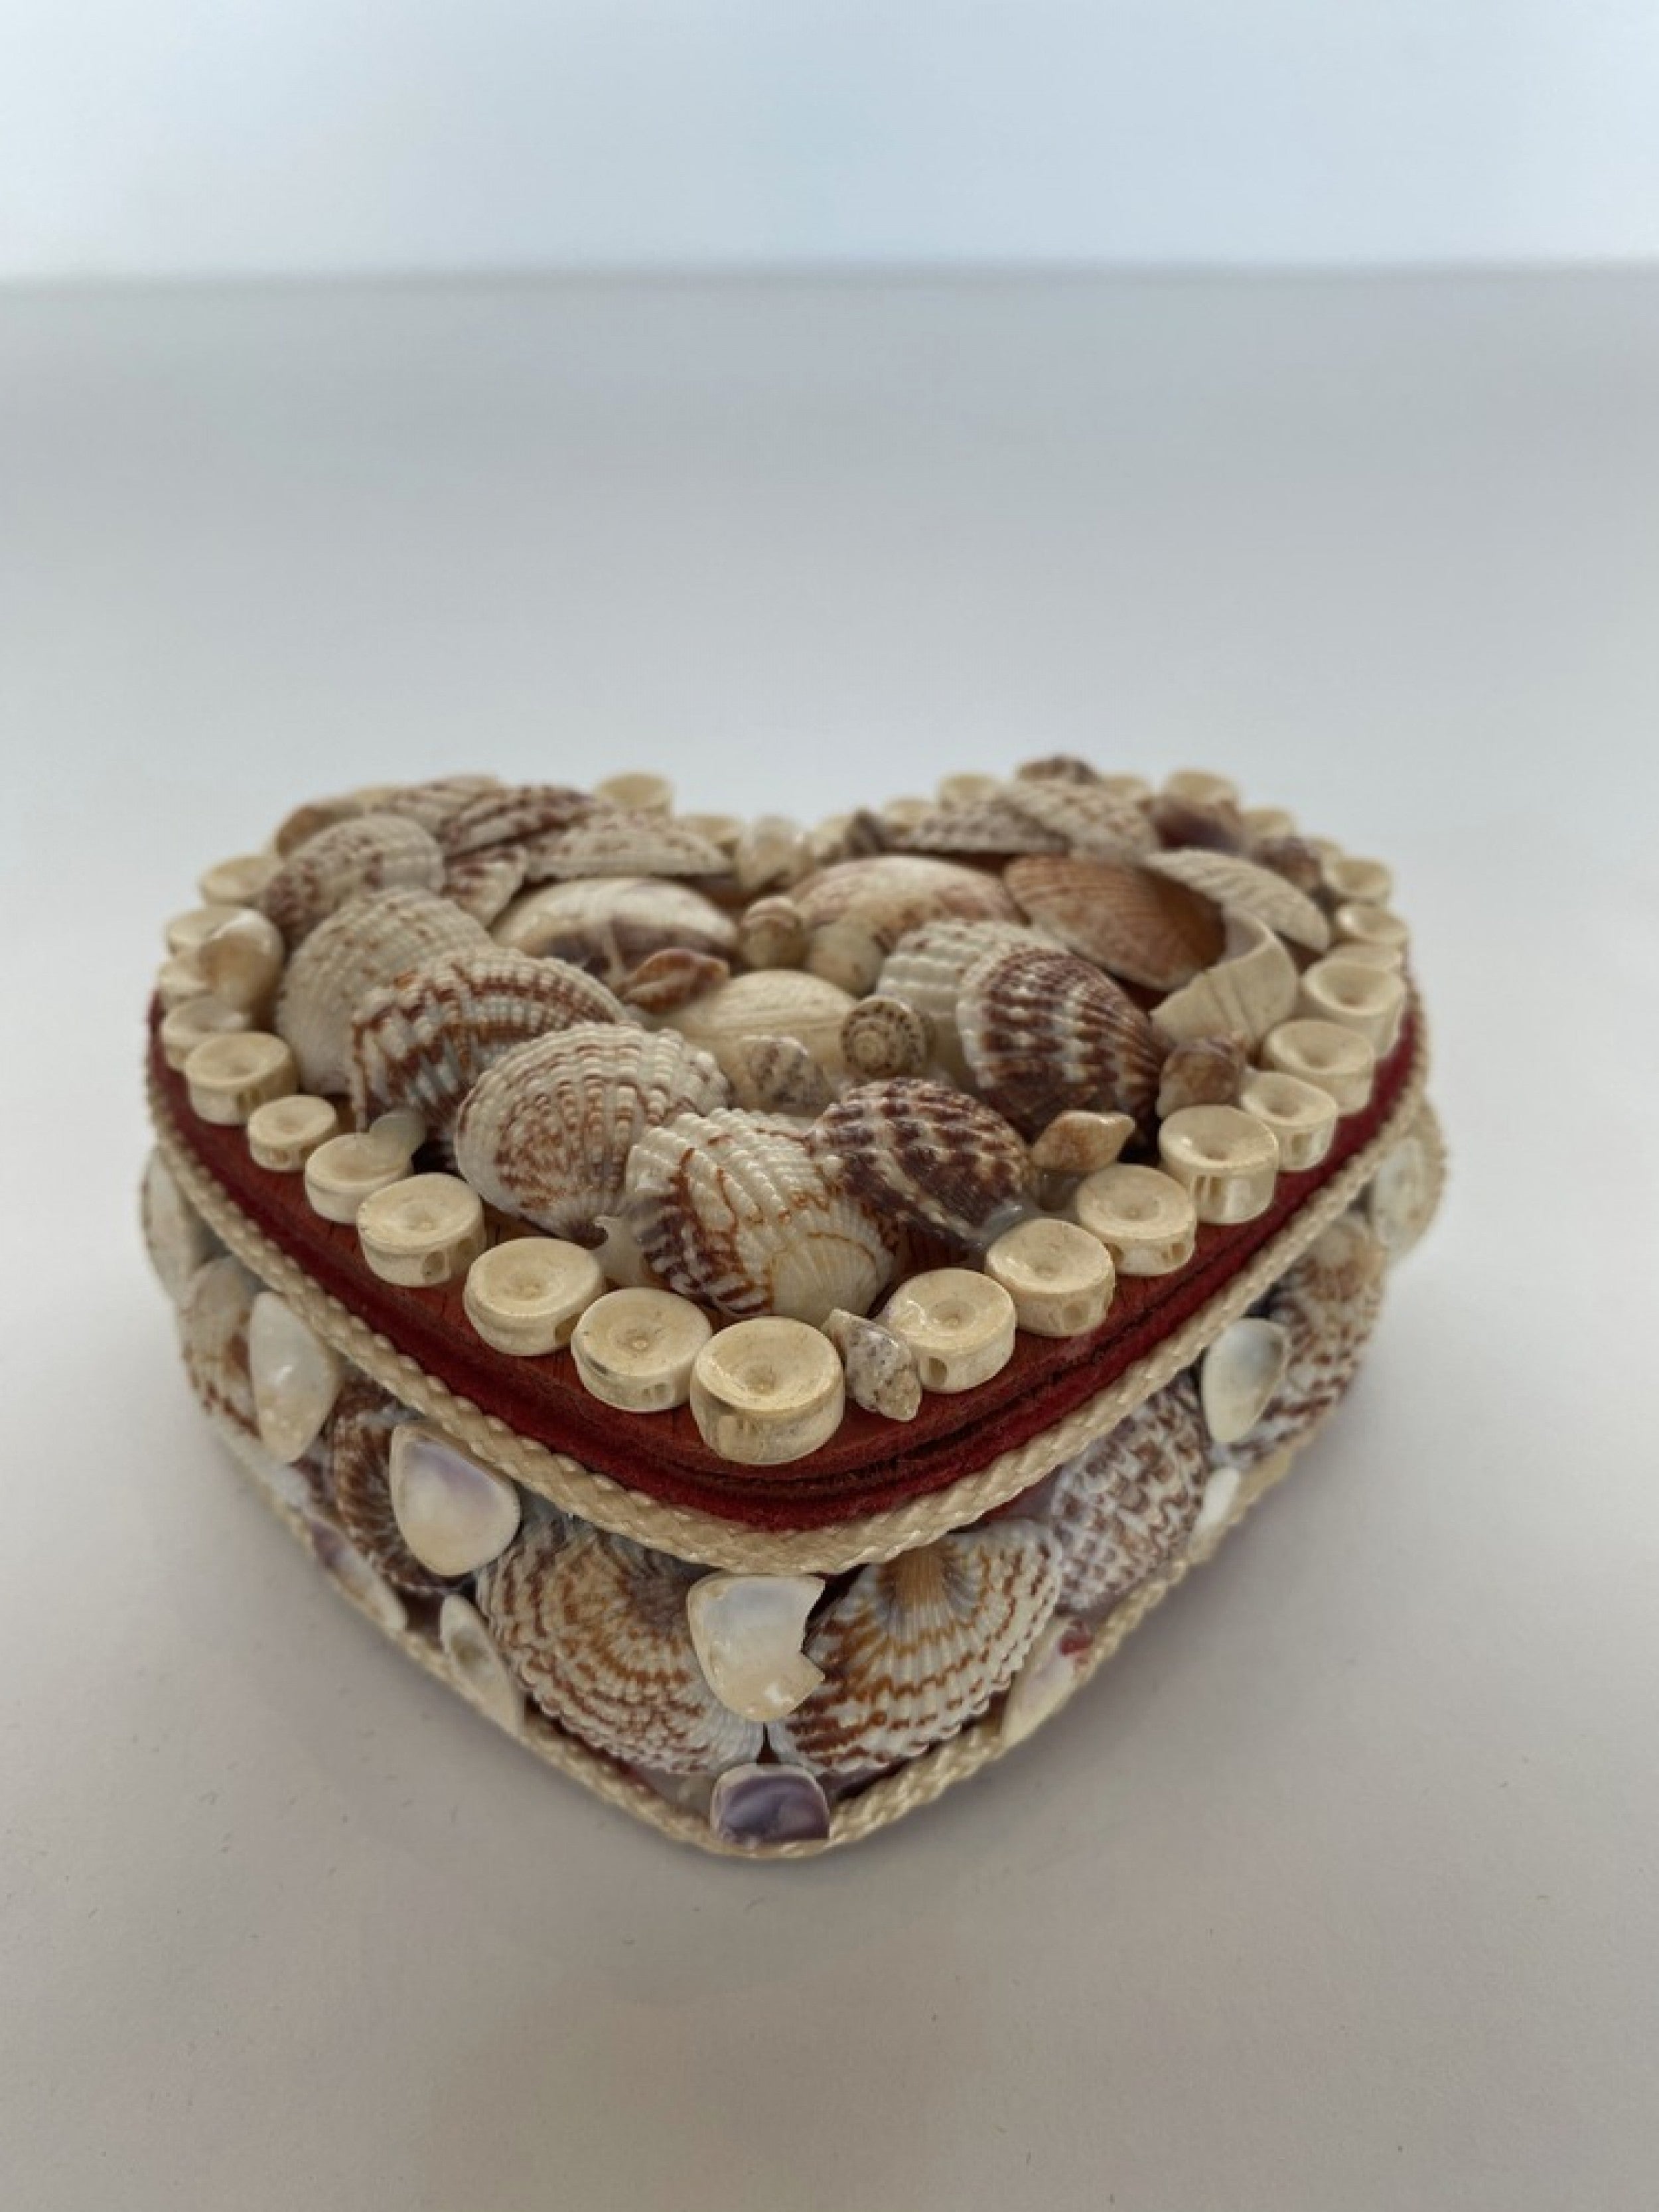 Contemporary American Modern Heart Shaped Seashell Jewelry Box For Sale